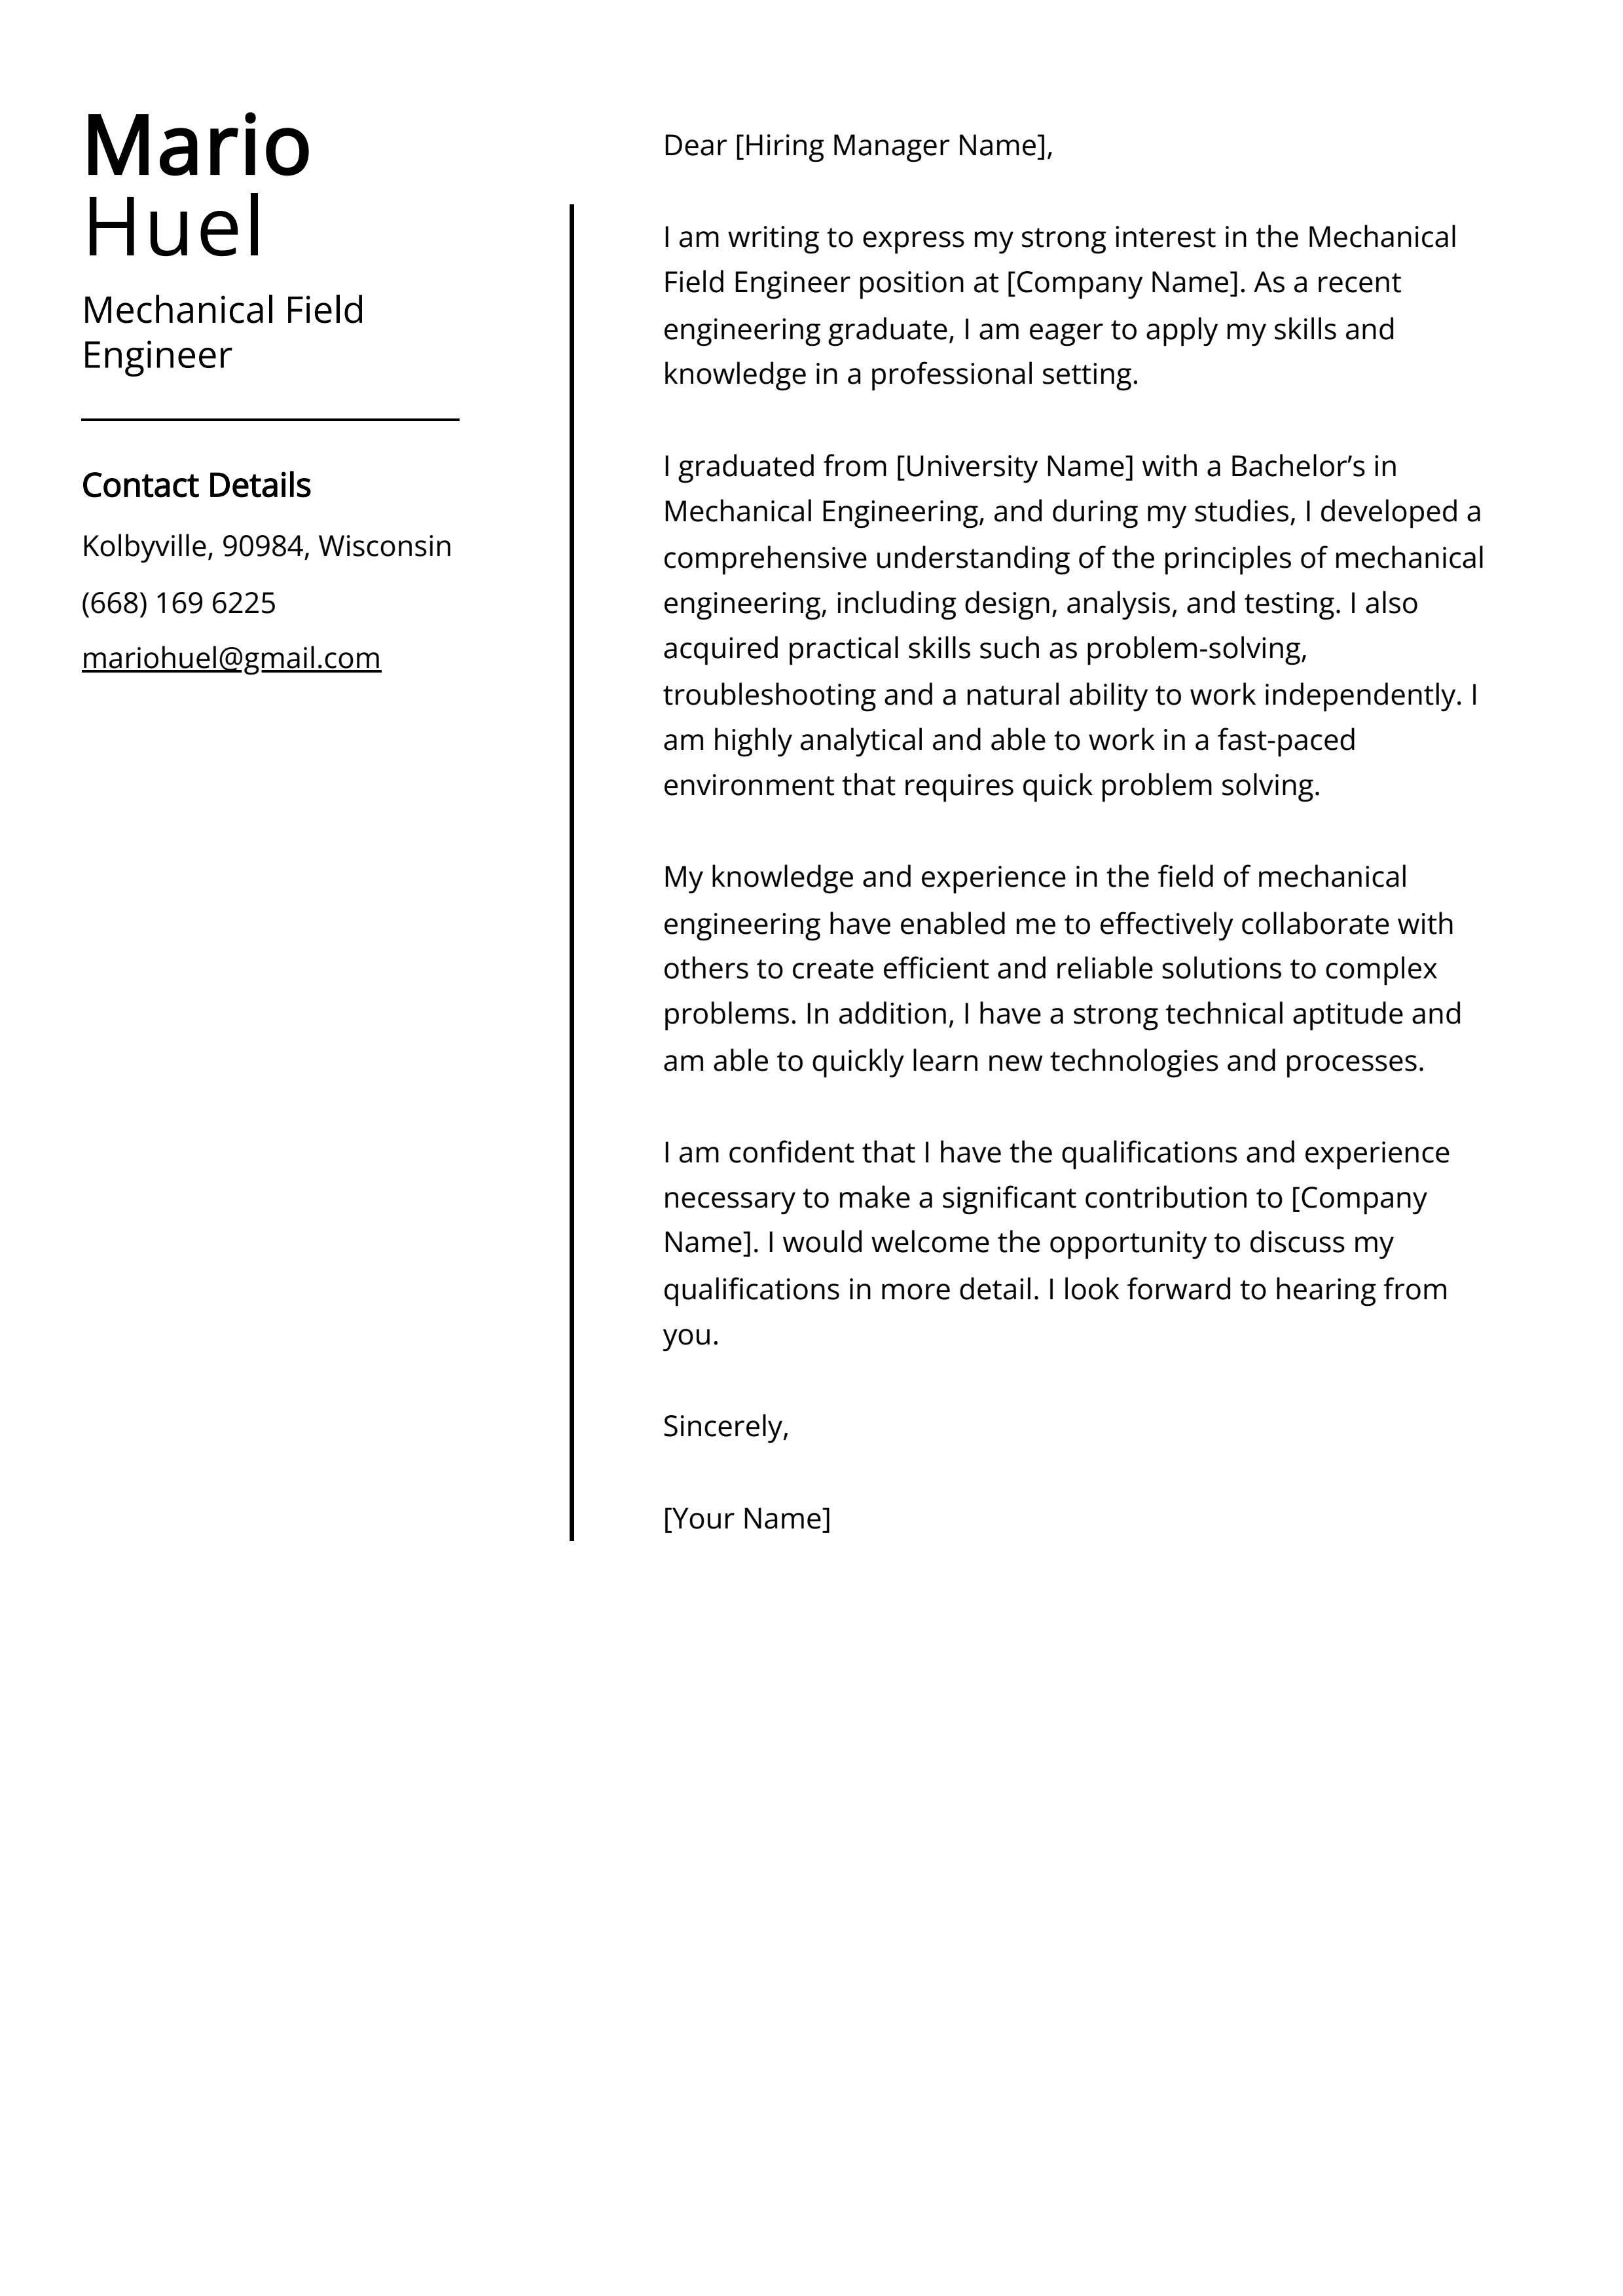 Mechanical Field Engineer Cover Letter Example